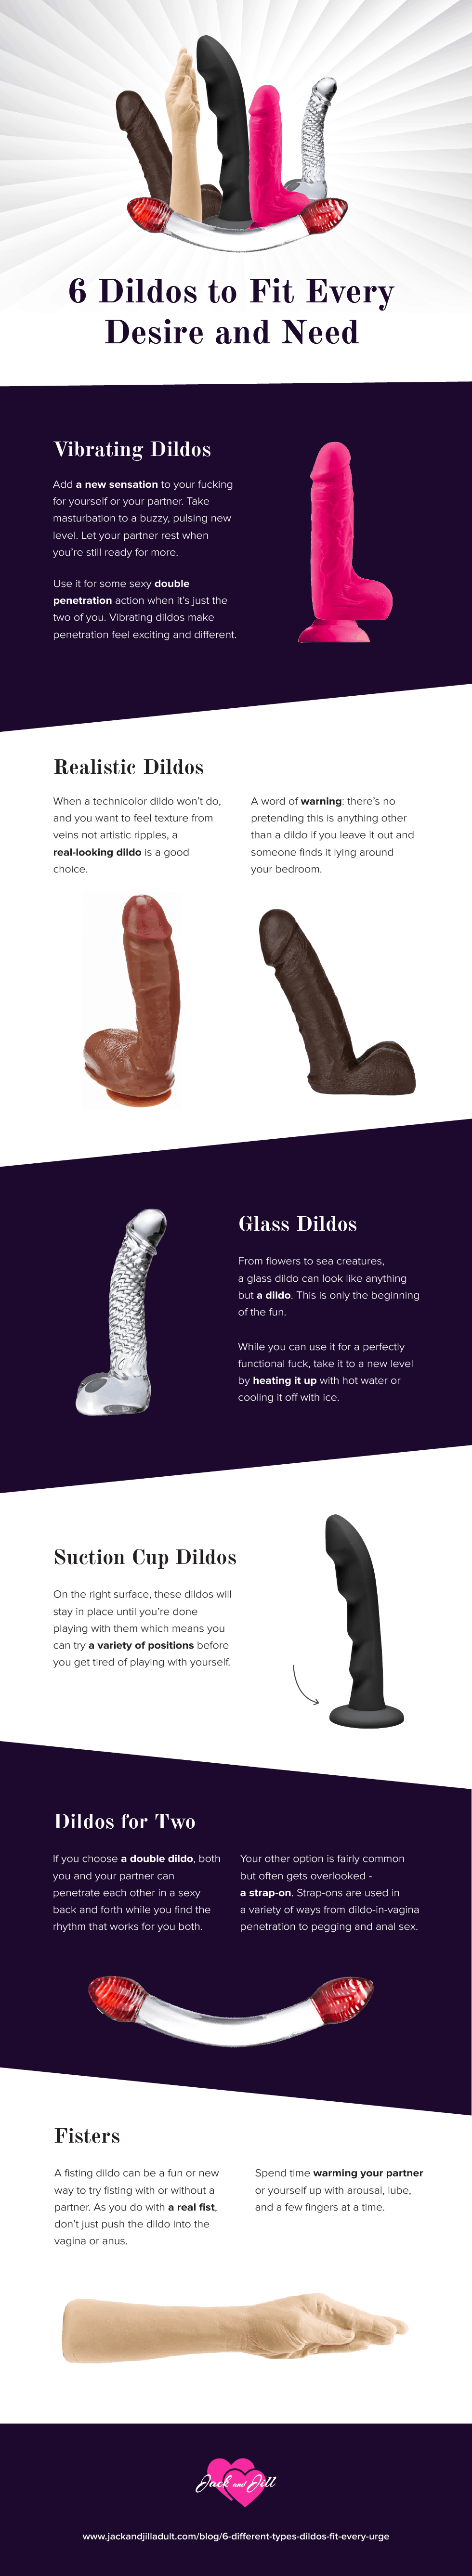 Infographic for 6 Different Types of Dildos to Fit Every Urge